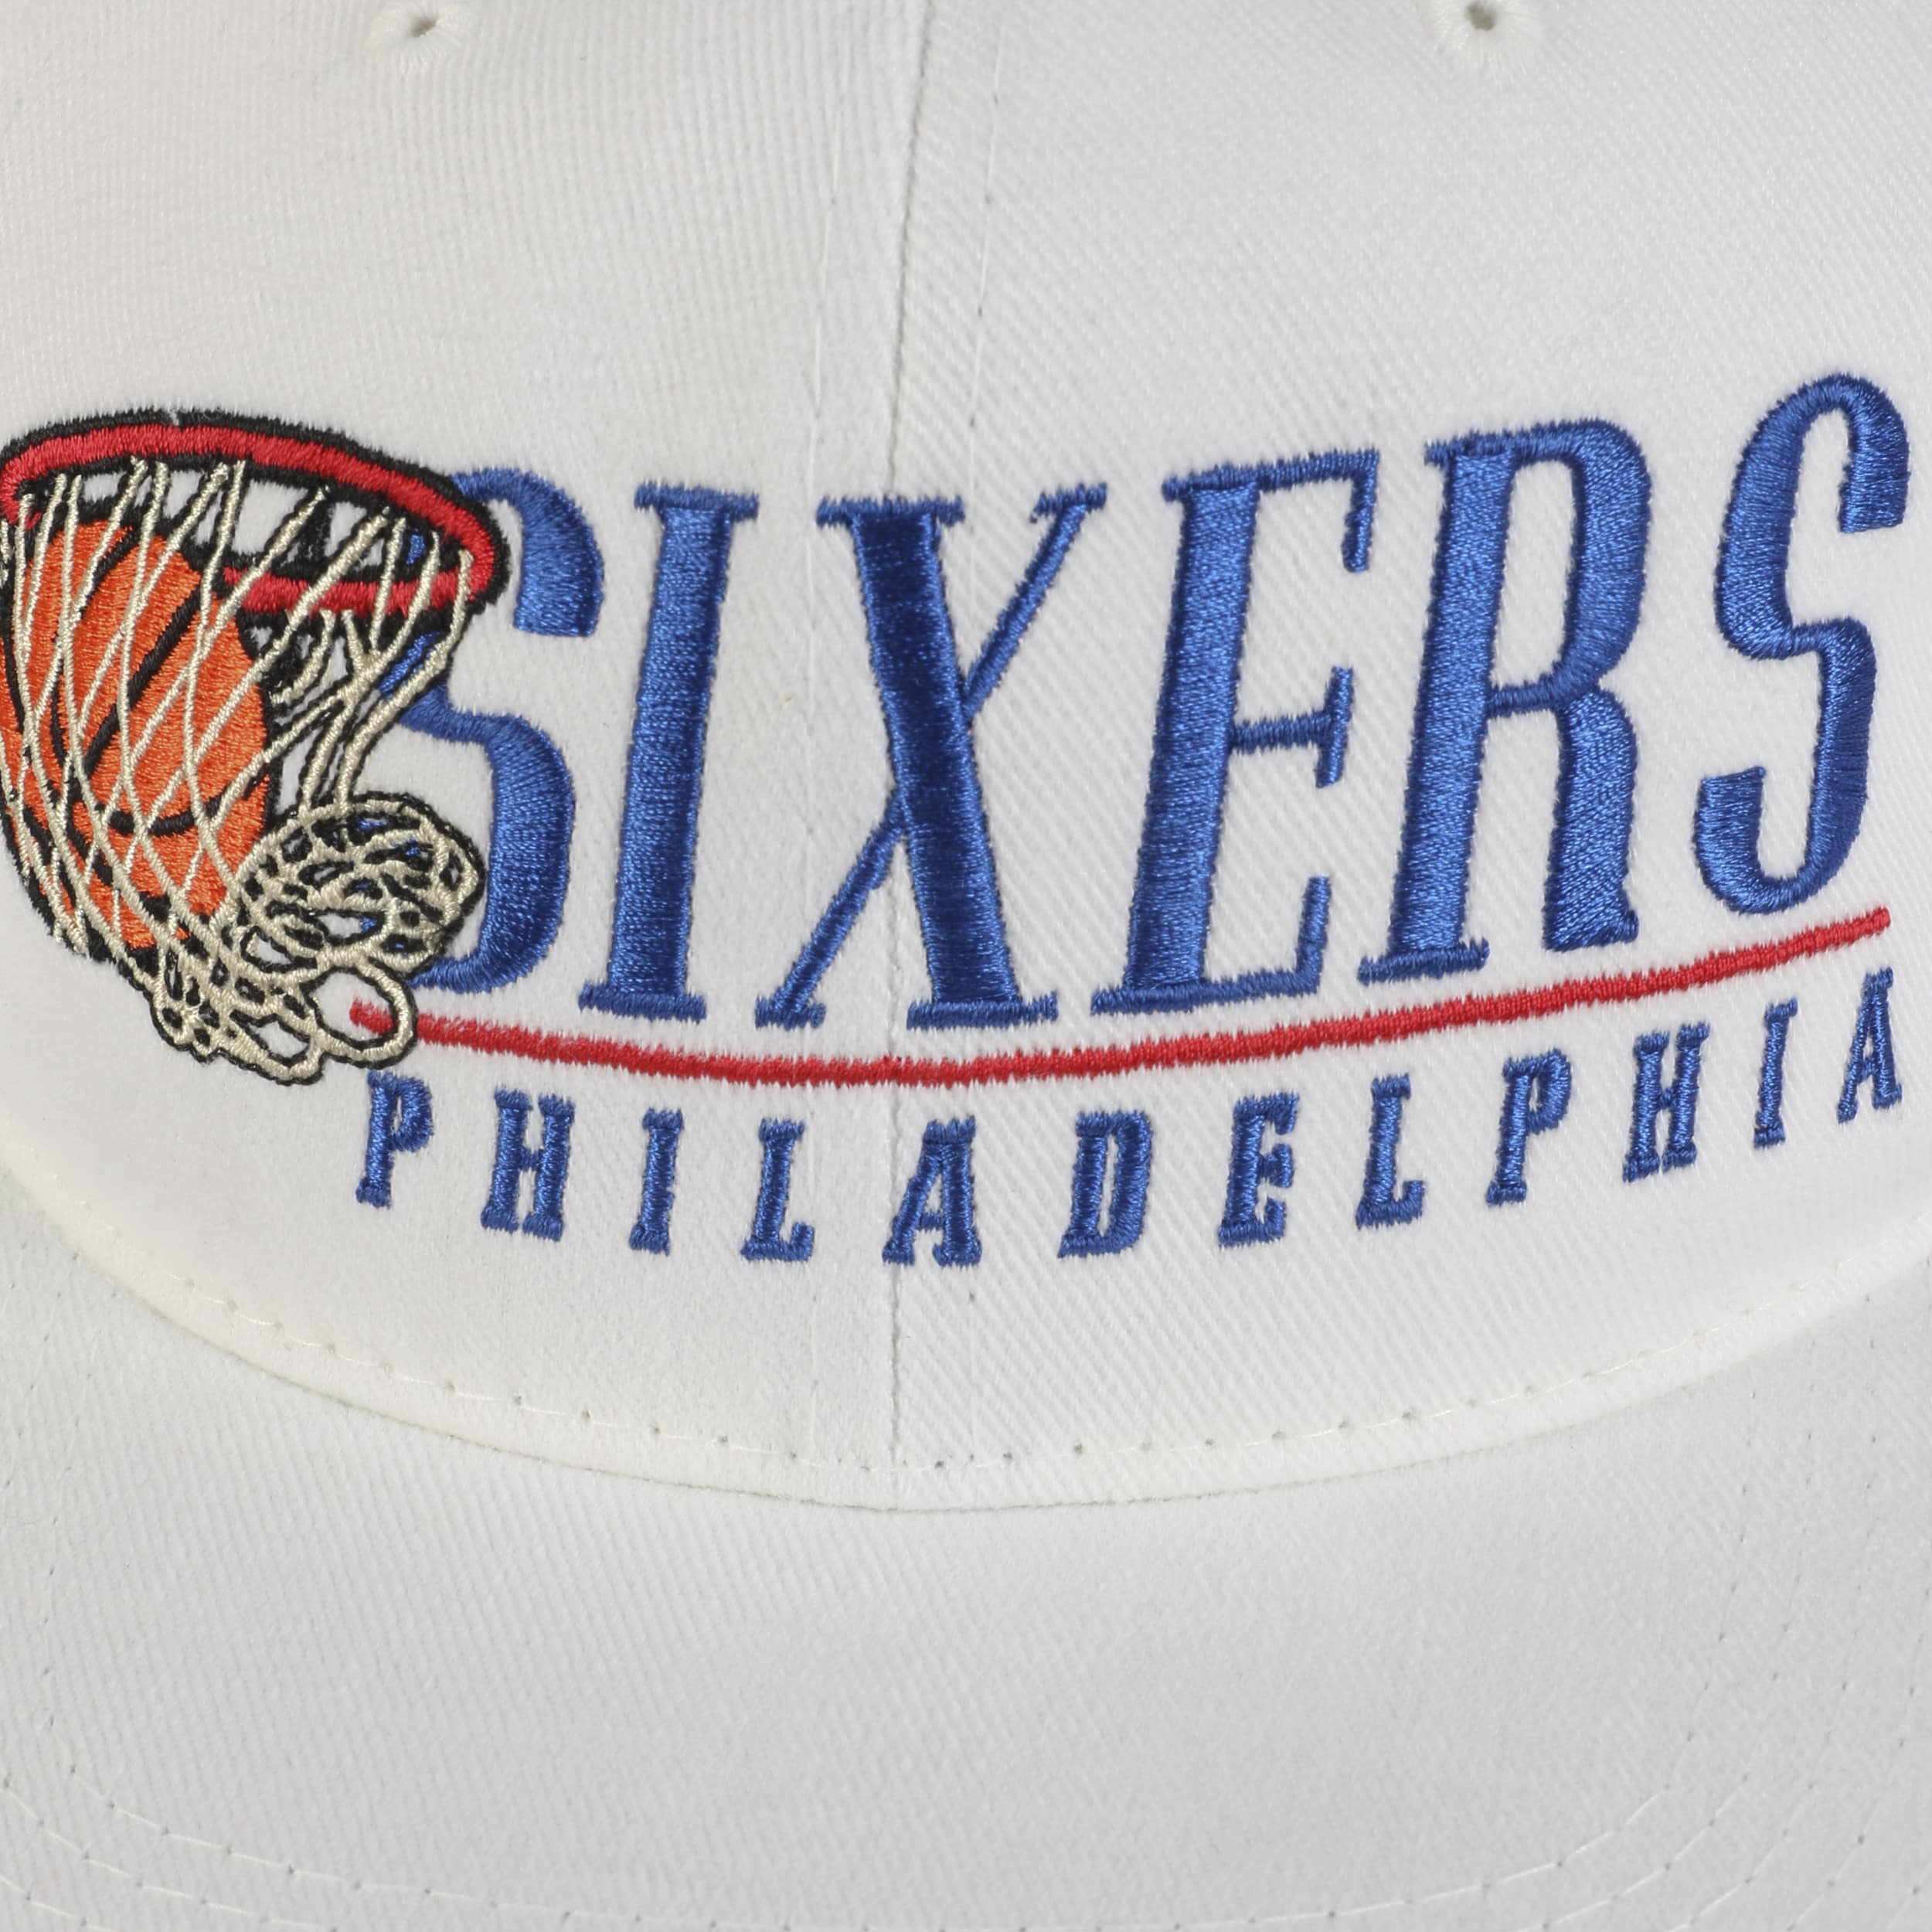 Vintage Hoop 76ers Cap by Mitchell & Ness